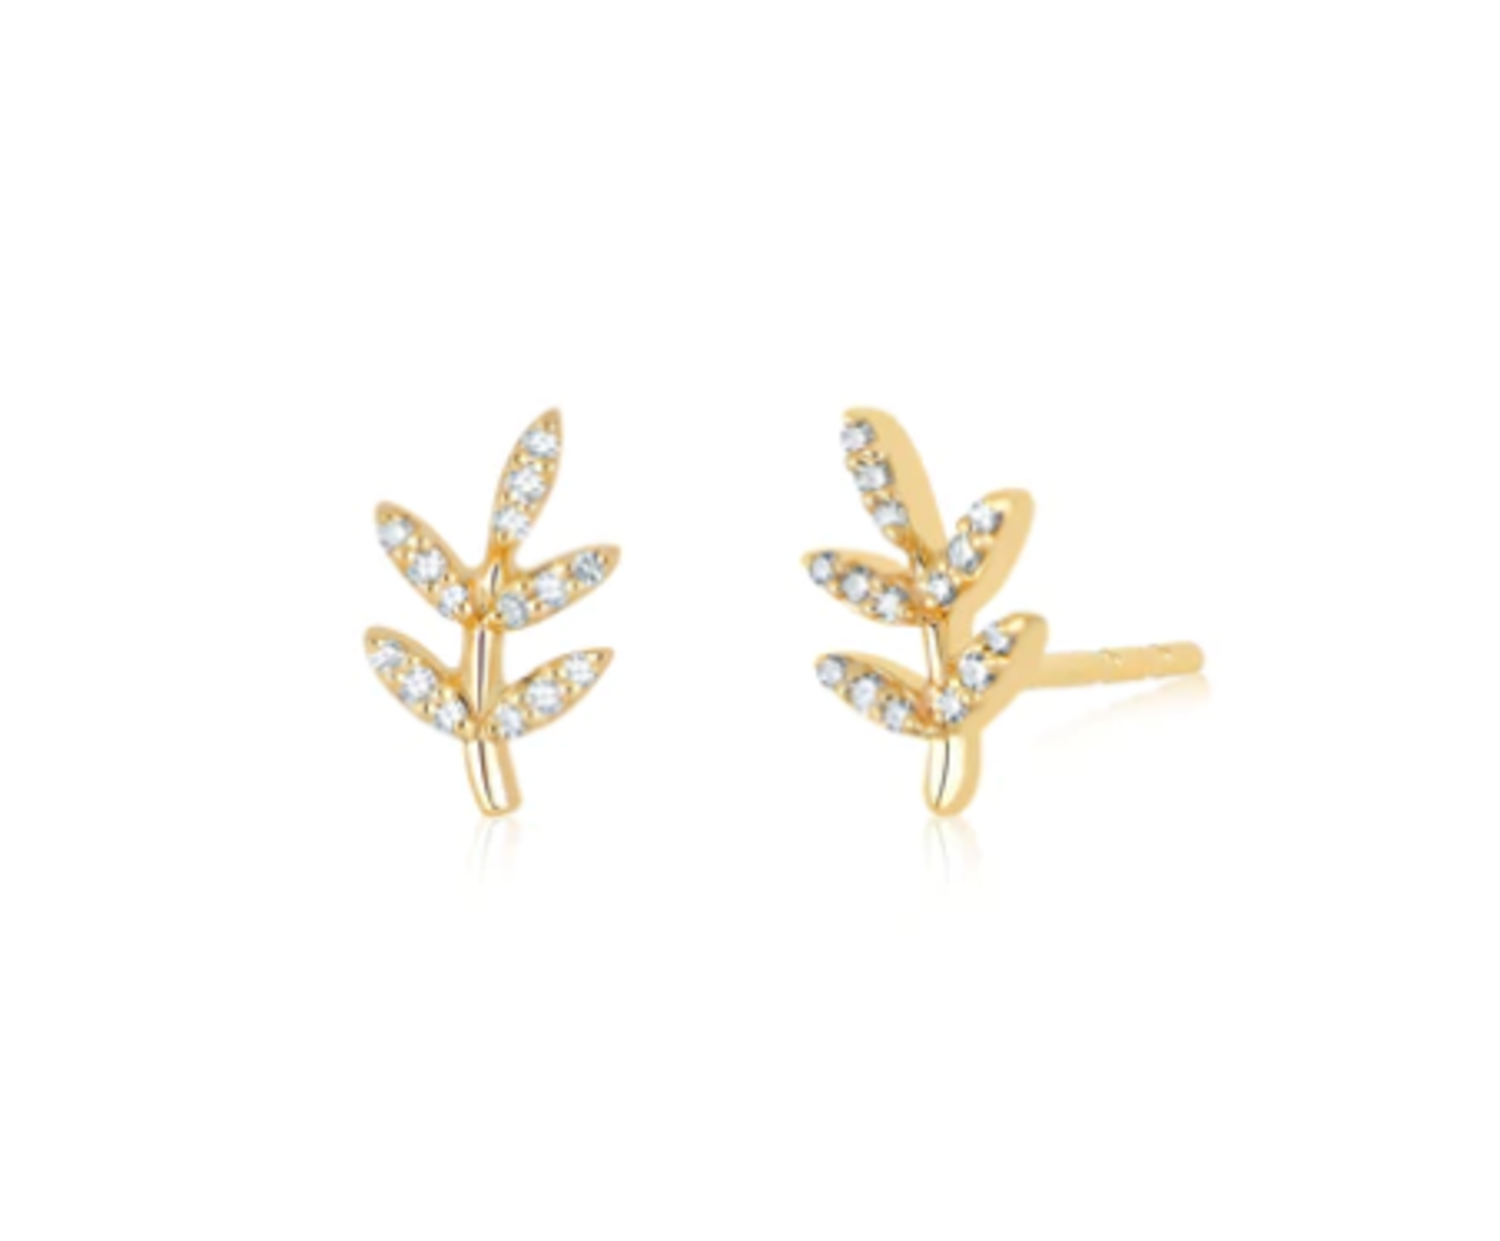 Louis Feraud Gold Tone Textured Leaf Earrings Lightweight Clip On